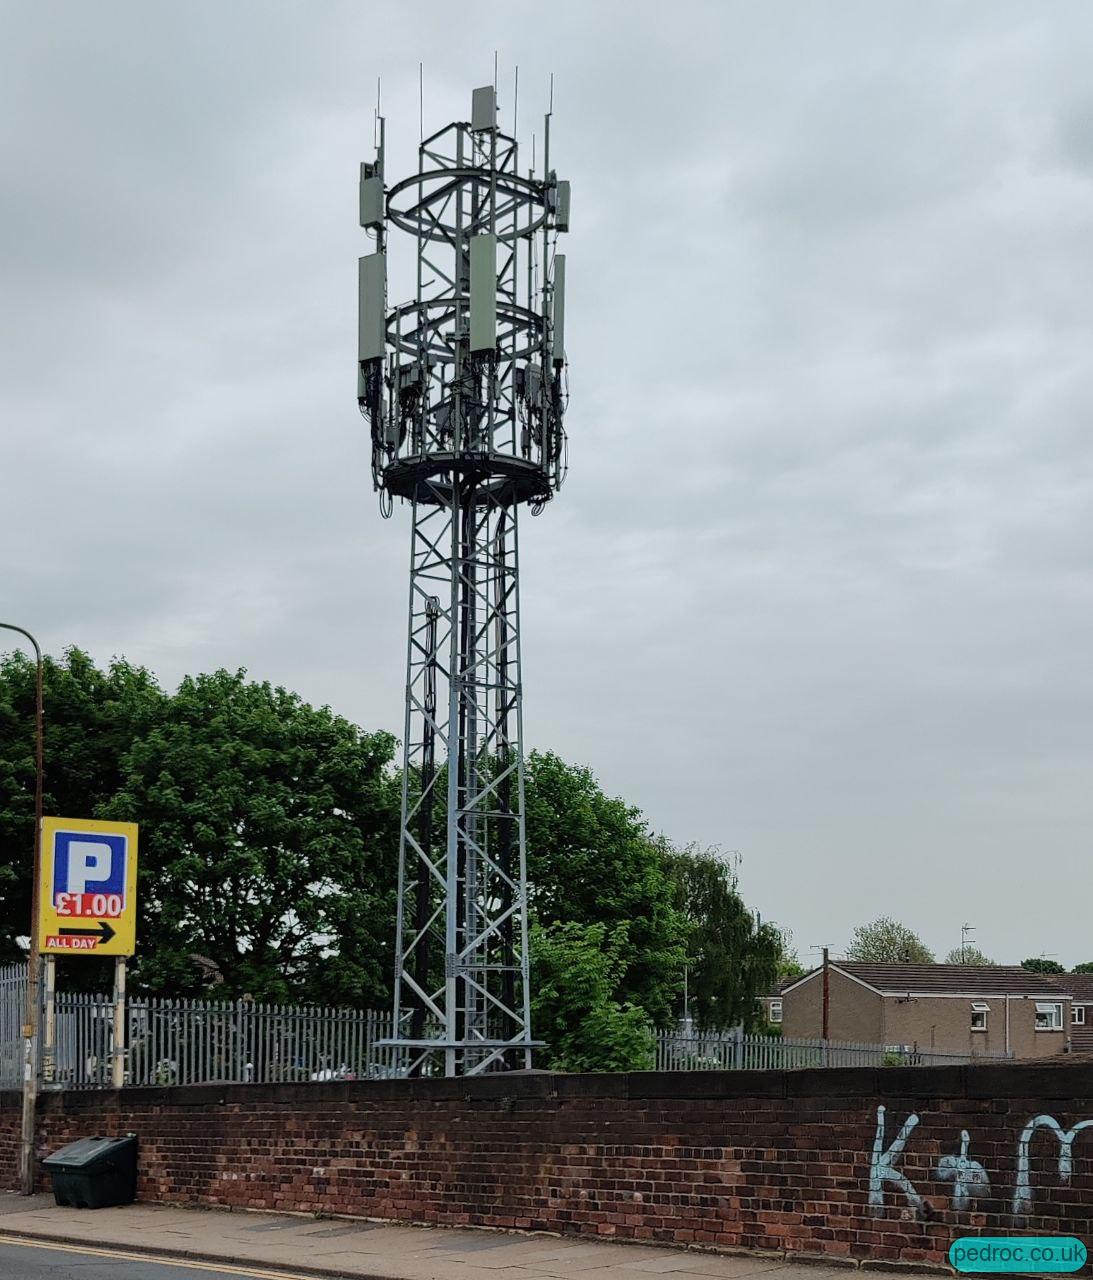 EE (BT) Nokia 4G and 32T32R 5G site in Hull